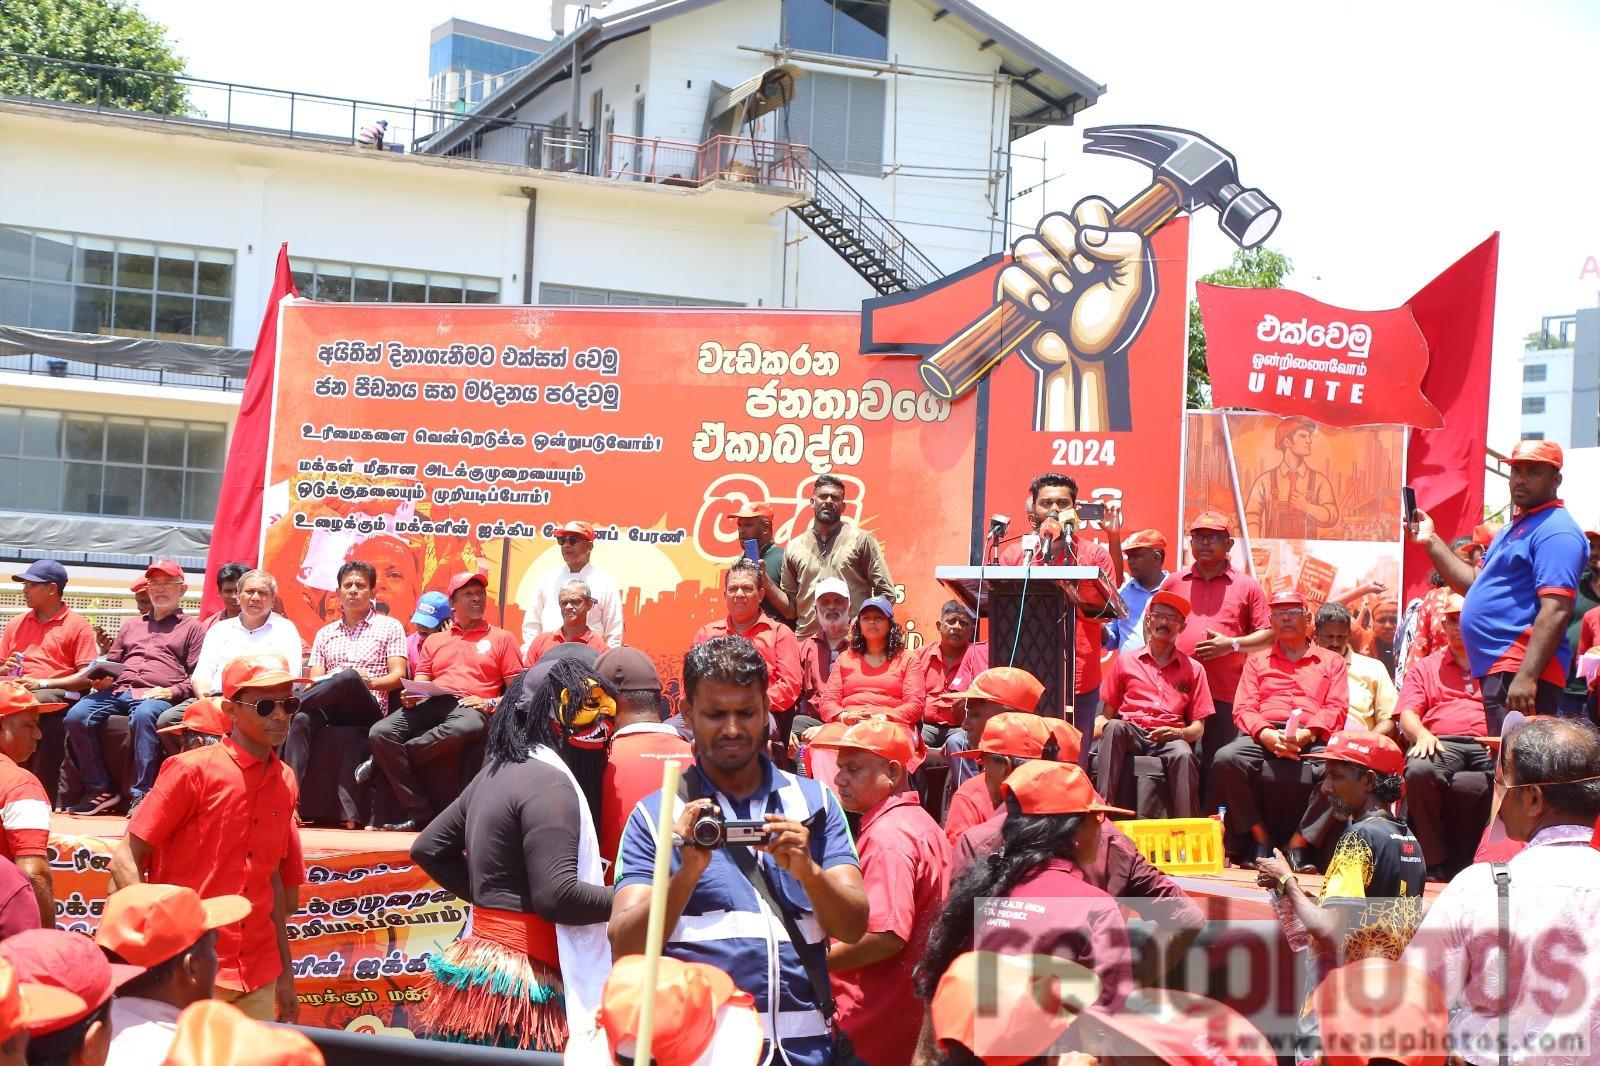 SRI LANKA ASSOCIATION OF PROFESSIONAL SOCIAL WORKERS MAY DAY RALLY